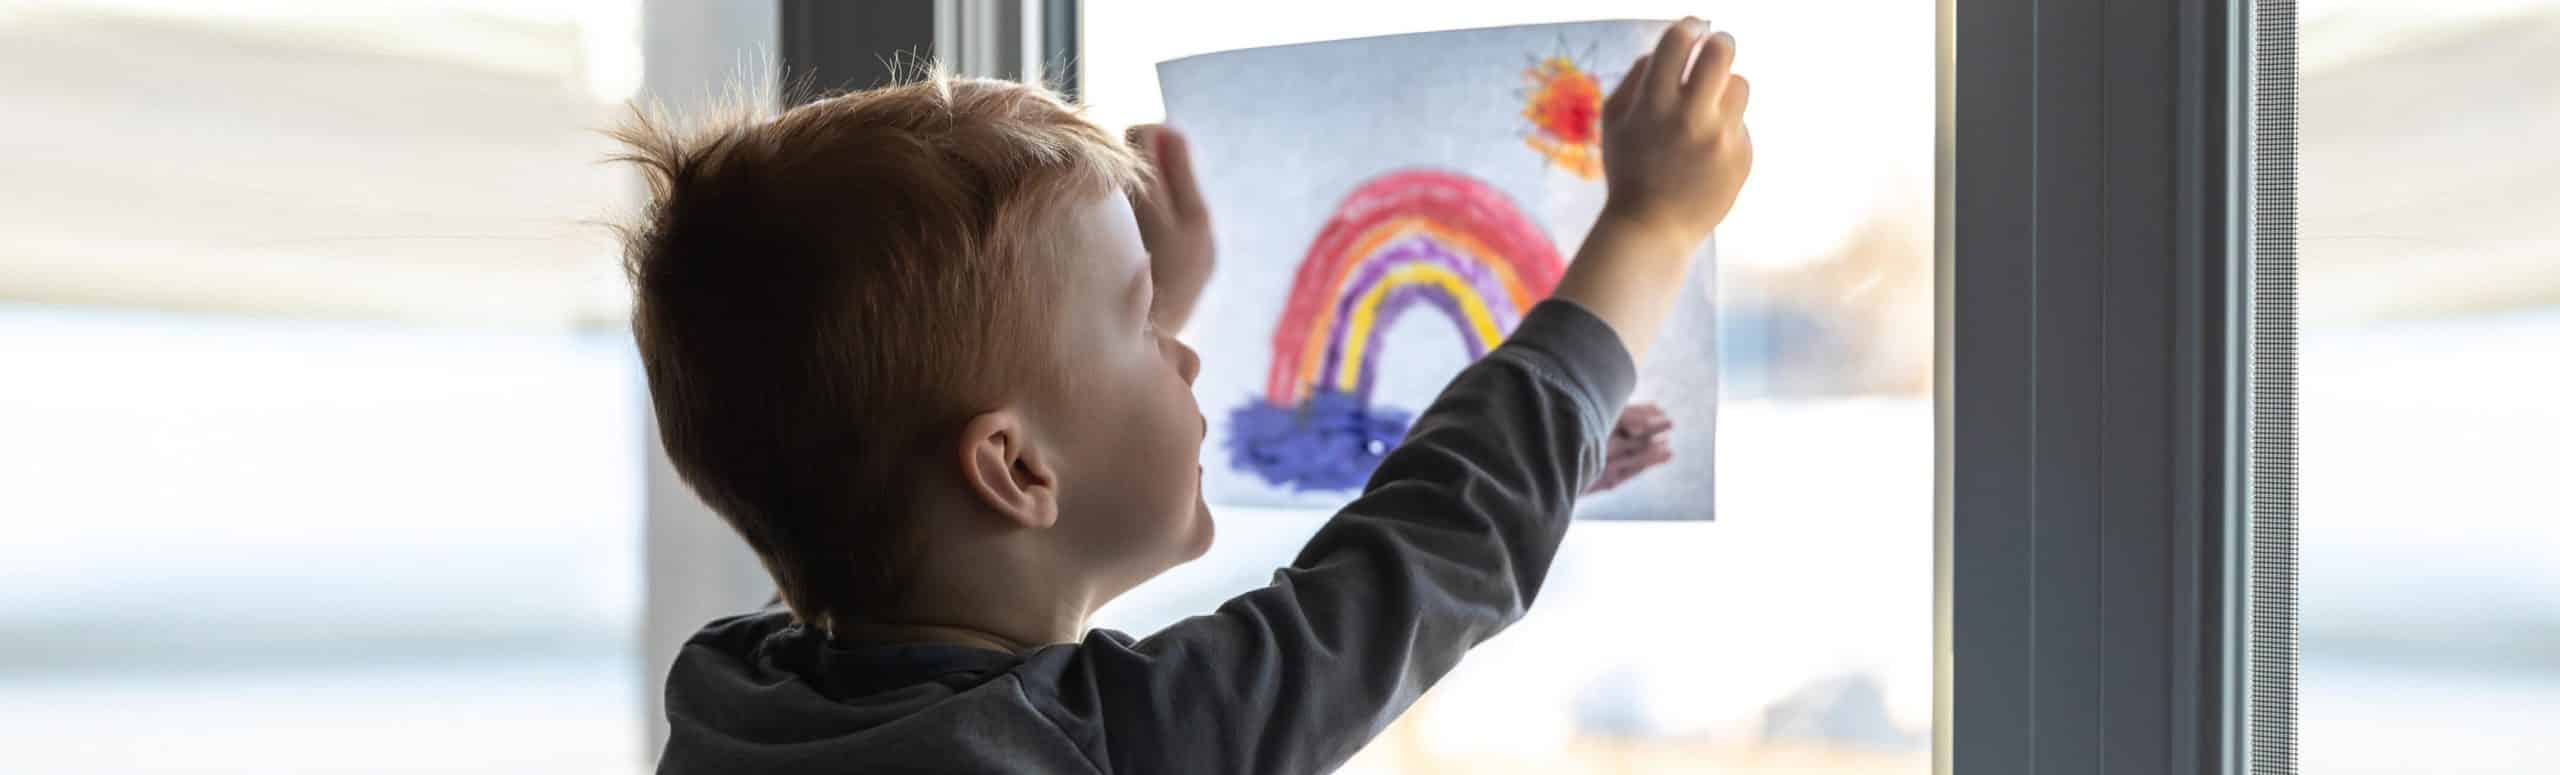 A kid sticking a drawing of a rainbow towards the window.